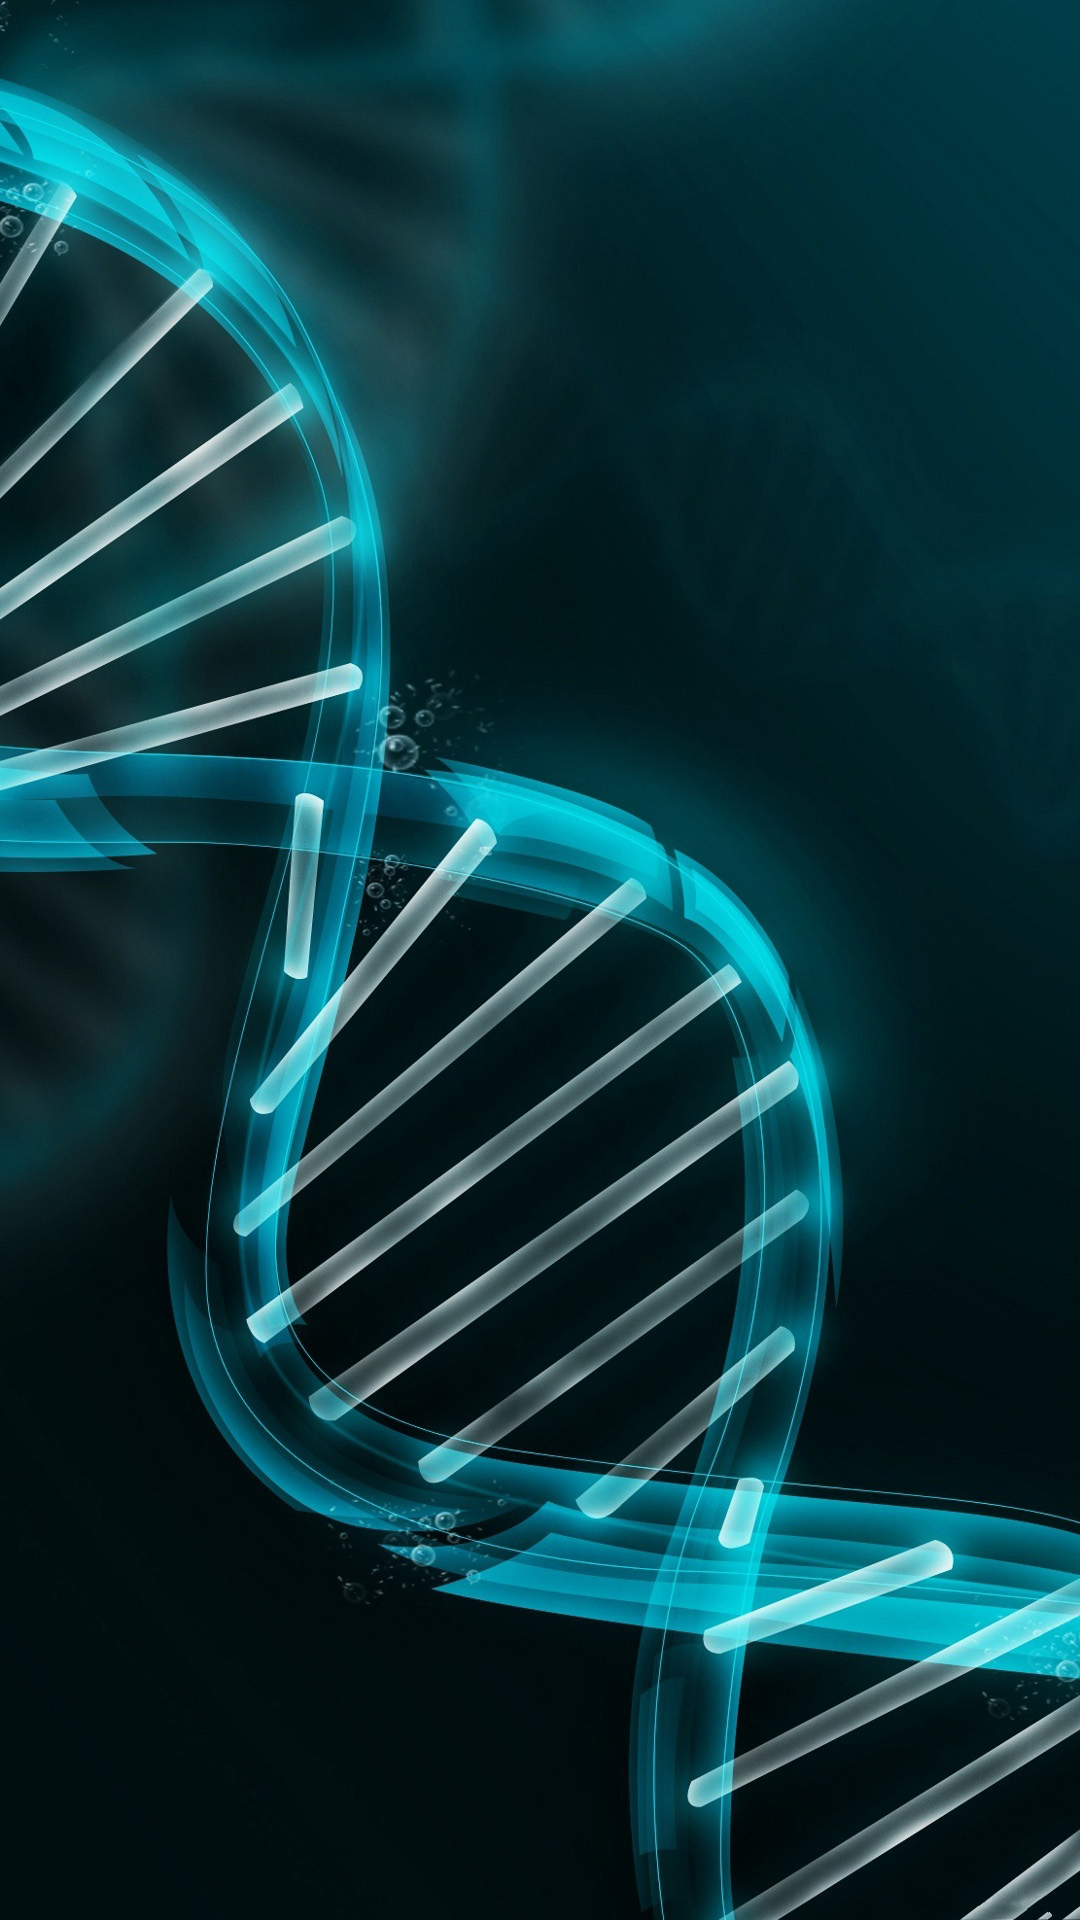 DNA Strand Illustration Android Wallpaper free download